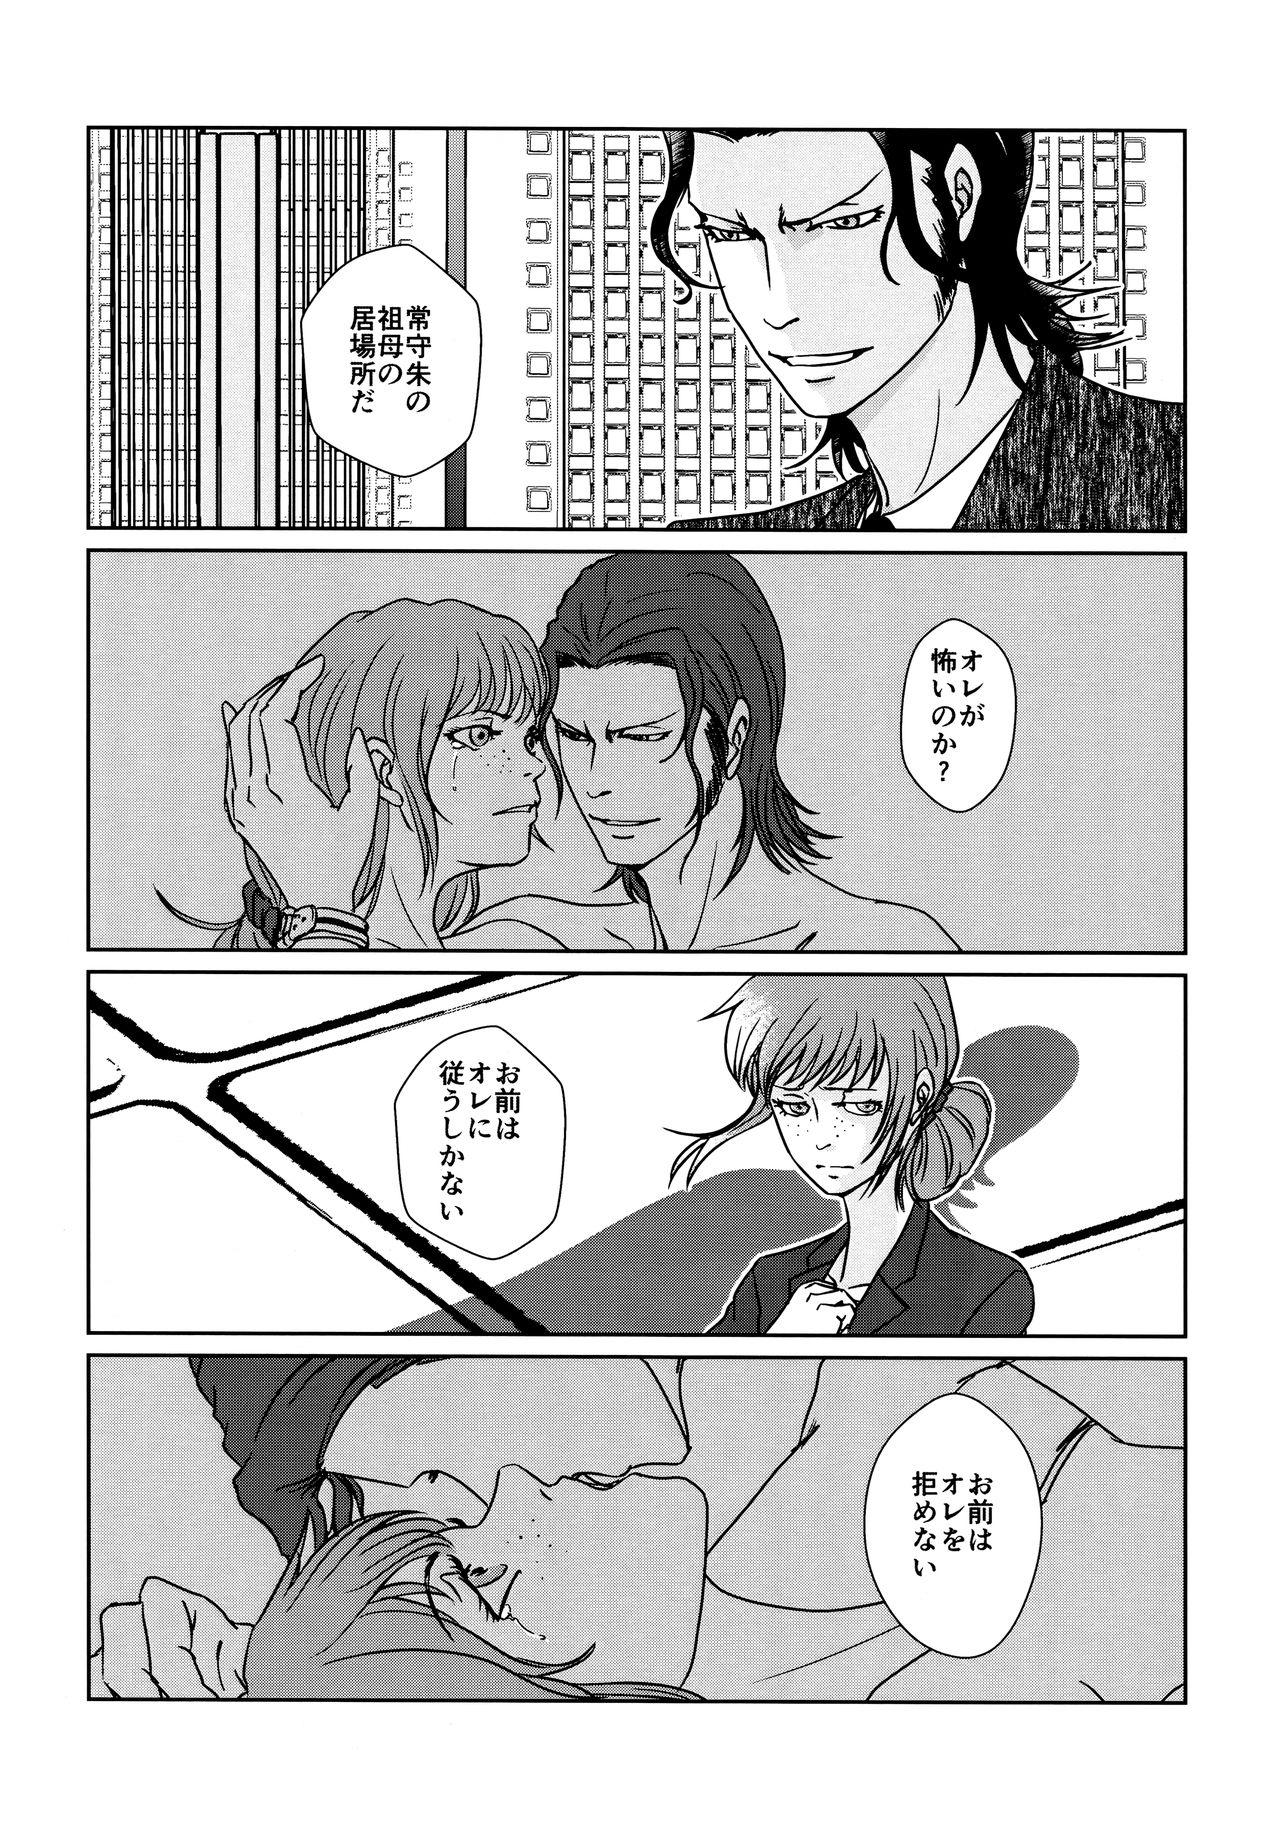 Humiliation CHANGES - Psycho pass She - Page 7